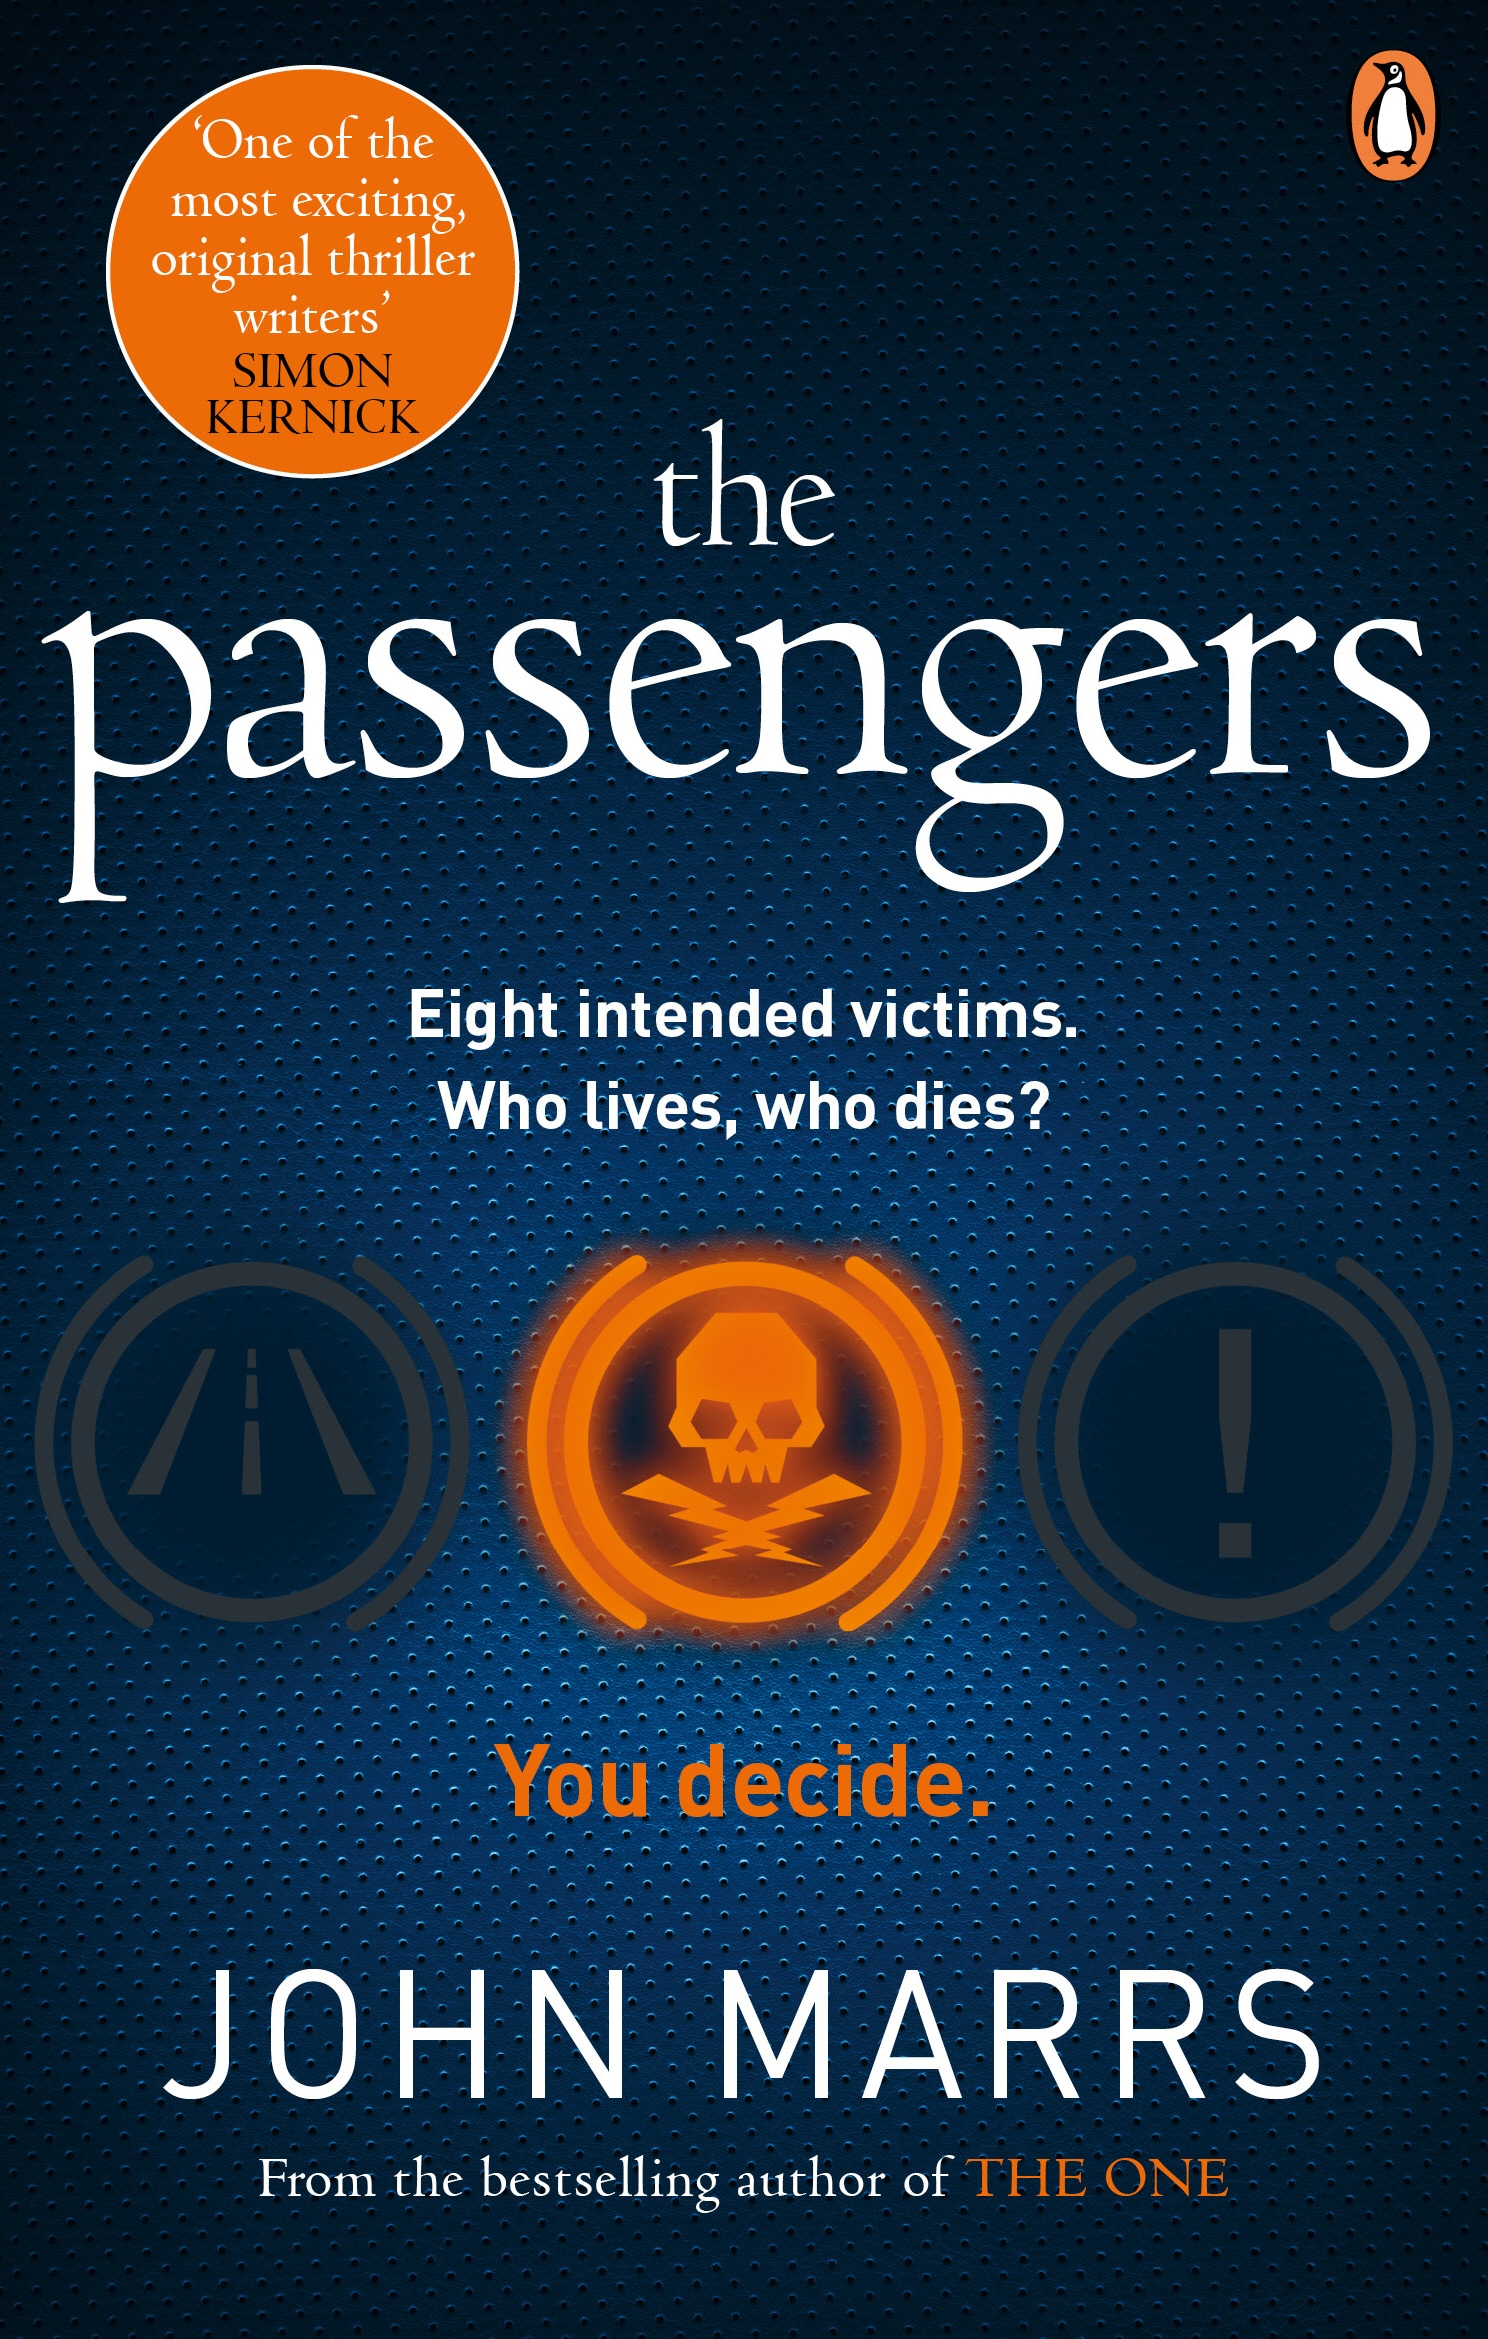 Book “The Passengers” by John Marrs — May 30, 2019